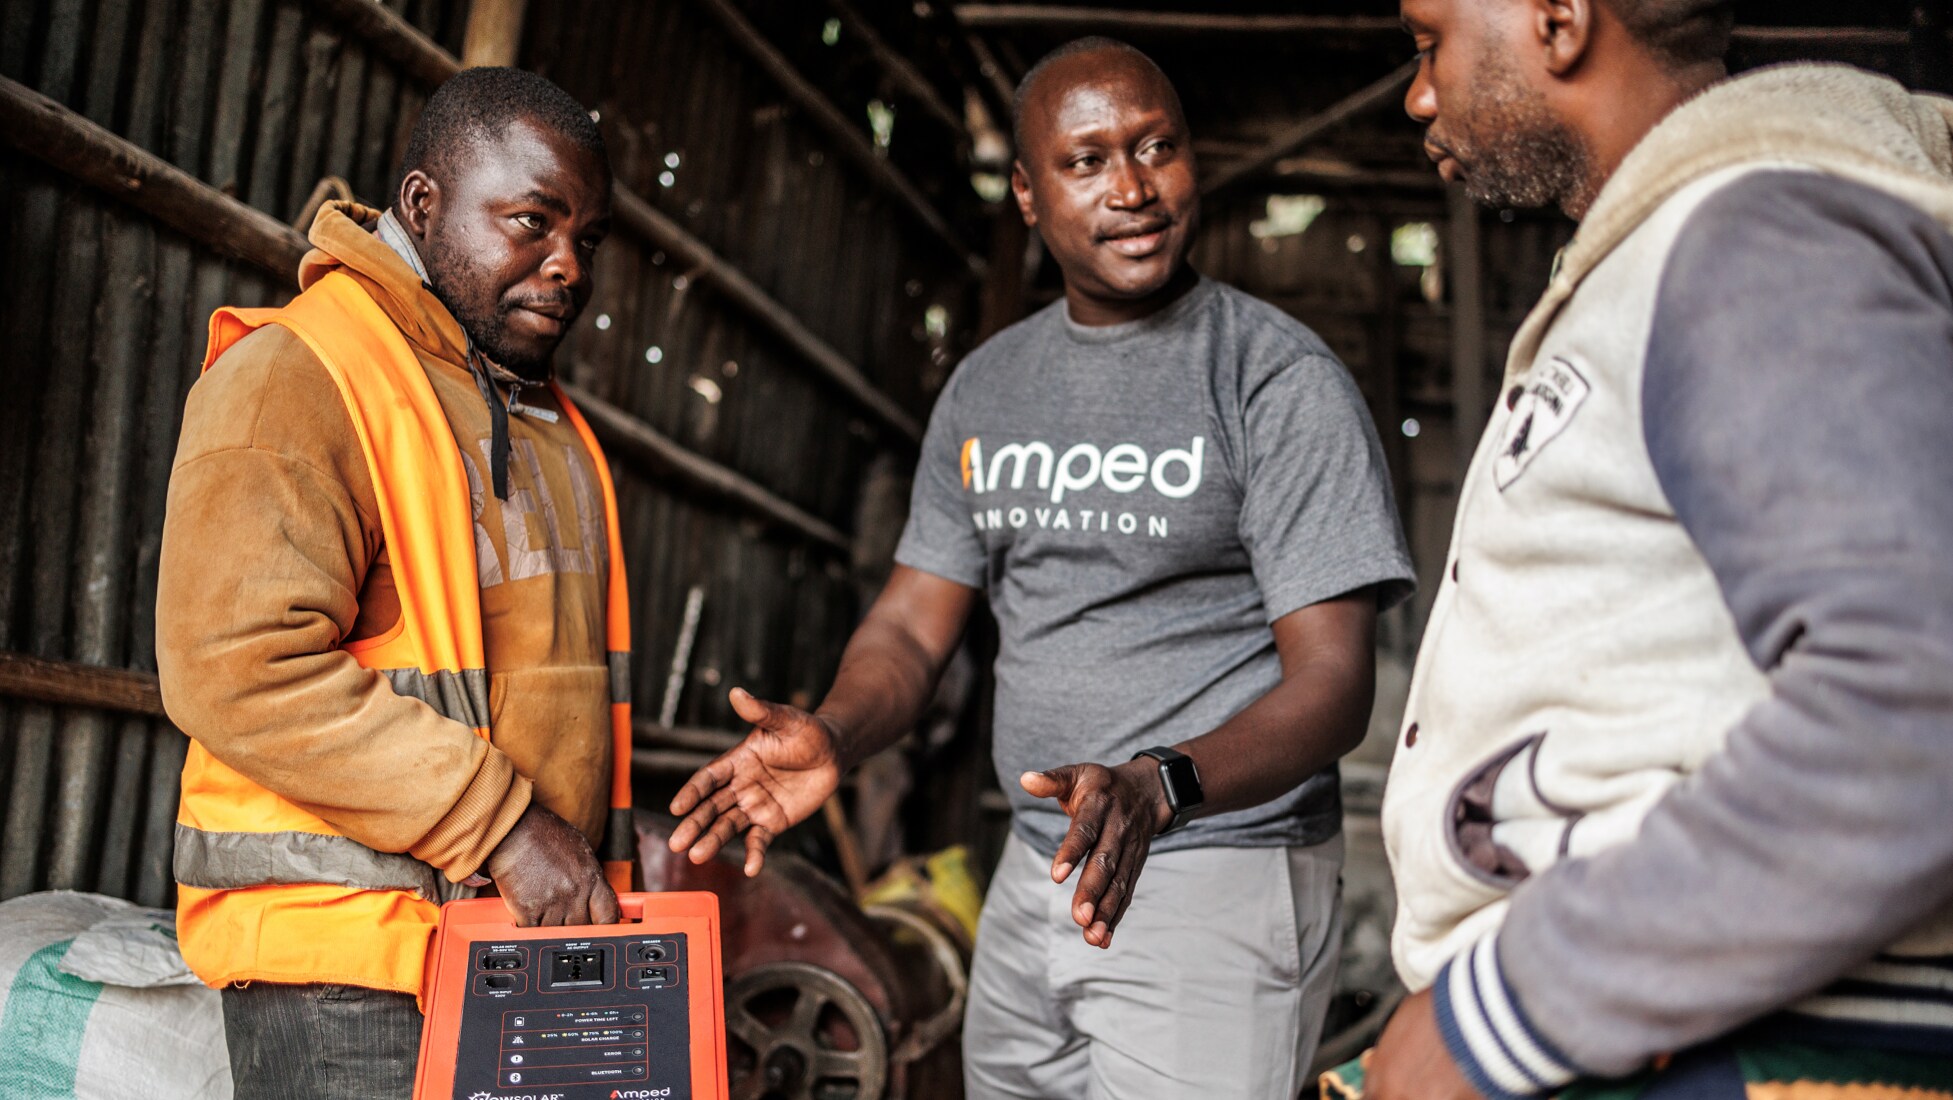 Amped Innovation representative wearing Amped-branded grey t-shirt explains benefits of solar generator to two men standing on either side of him. Man to his right is holding the Amped generator, wearing high-viz yellow vest and orange hoodie; man to his left is wearing a two-toned grey hoodie, looking at the generator while listening.